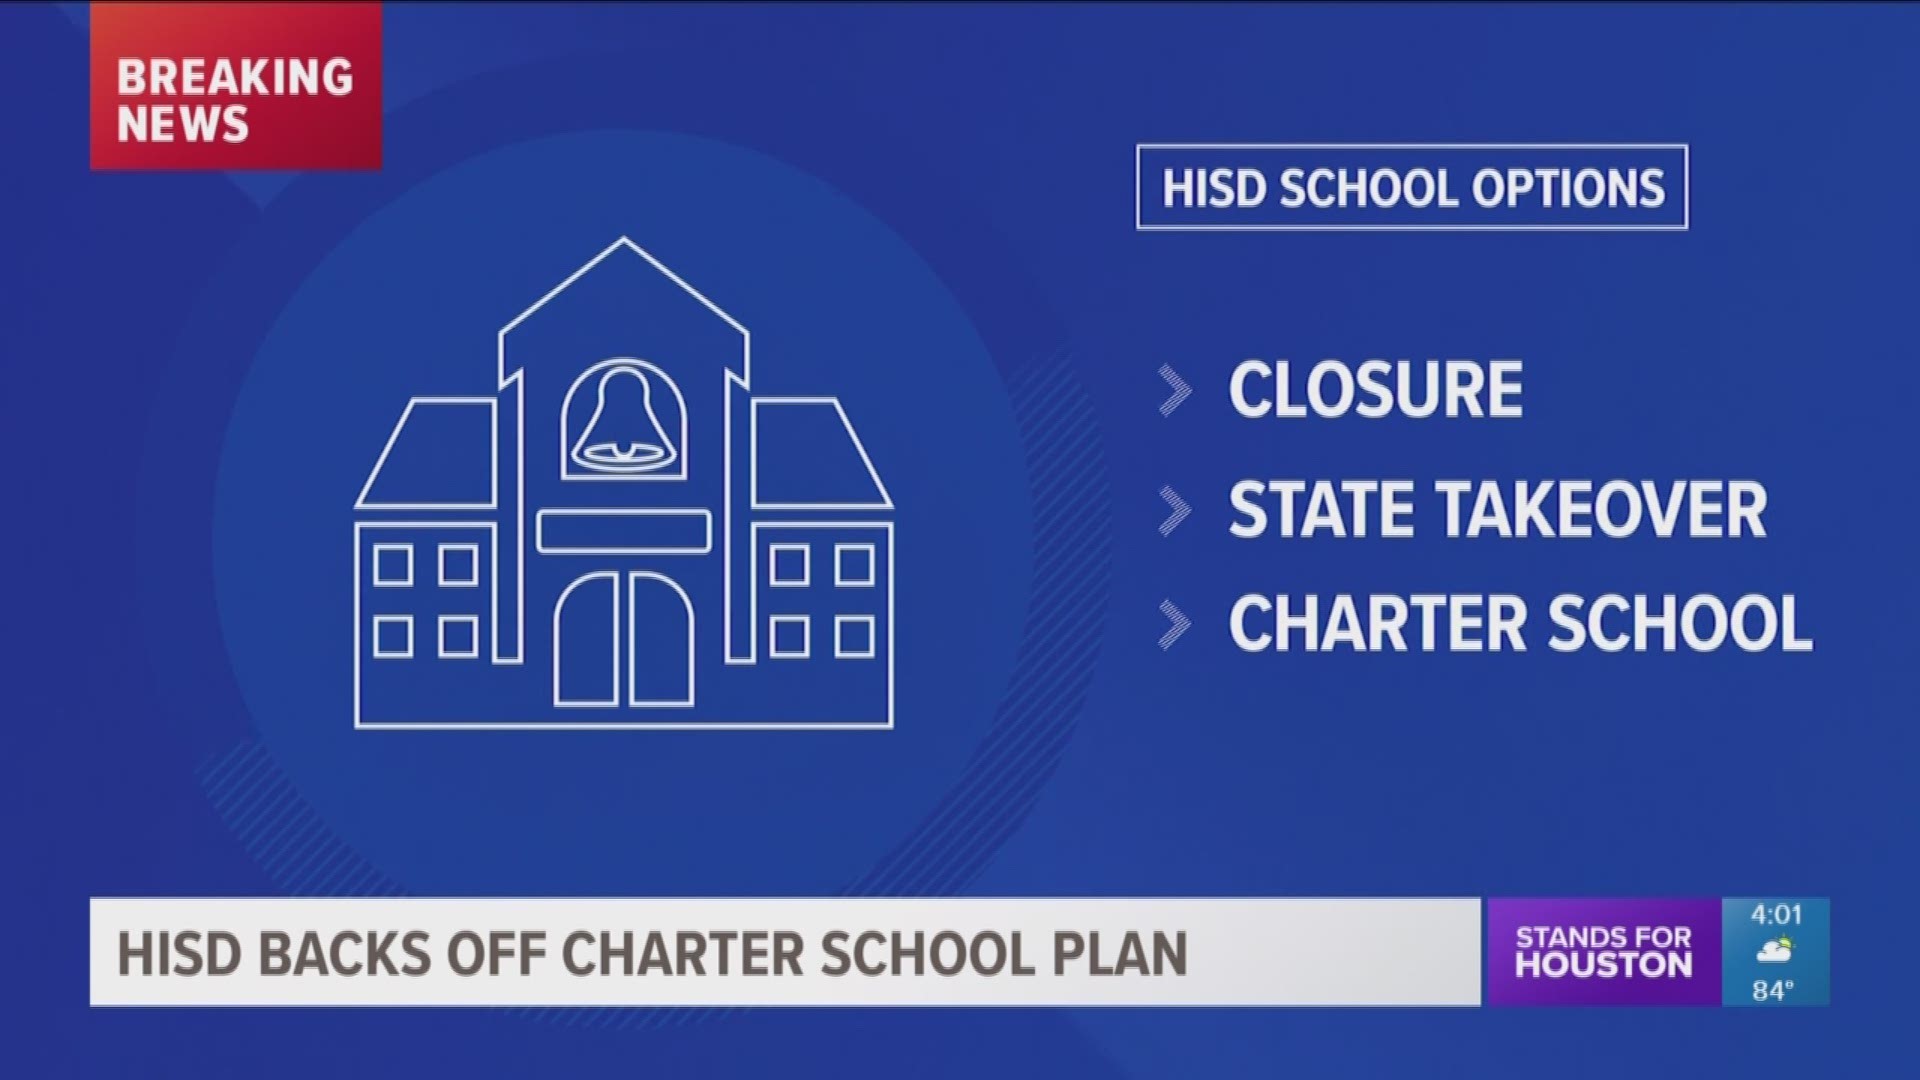 After a heated school board meeting, the HISD board will not vote on turning 10 campuses into charter schools.